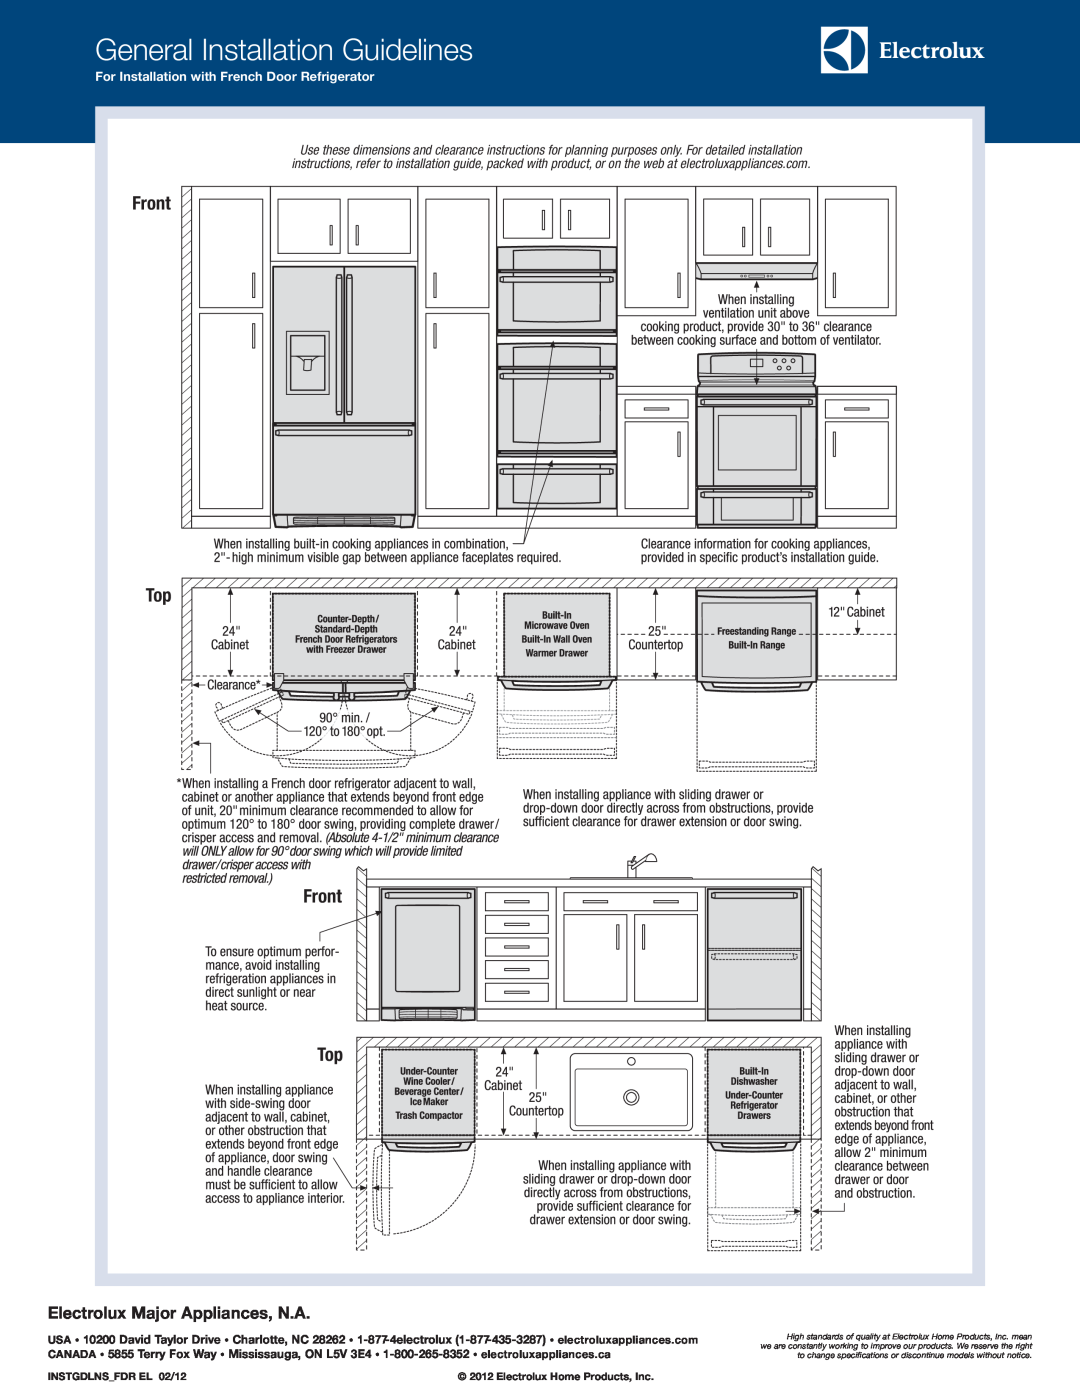 Electrolux EI30IF40L S General Installation Guidelines, Front Top, Electrolux Major Appliances, N.A, INSTGDLNSFDR EL 02/12 